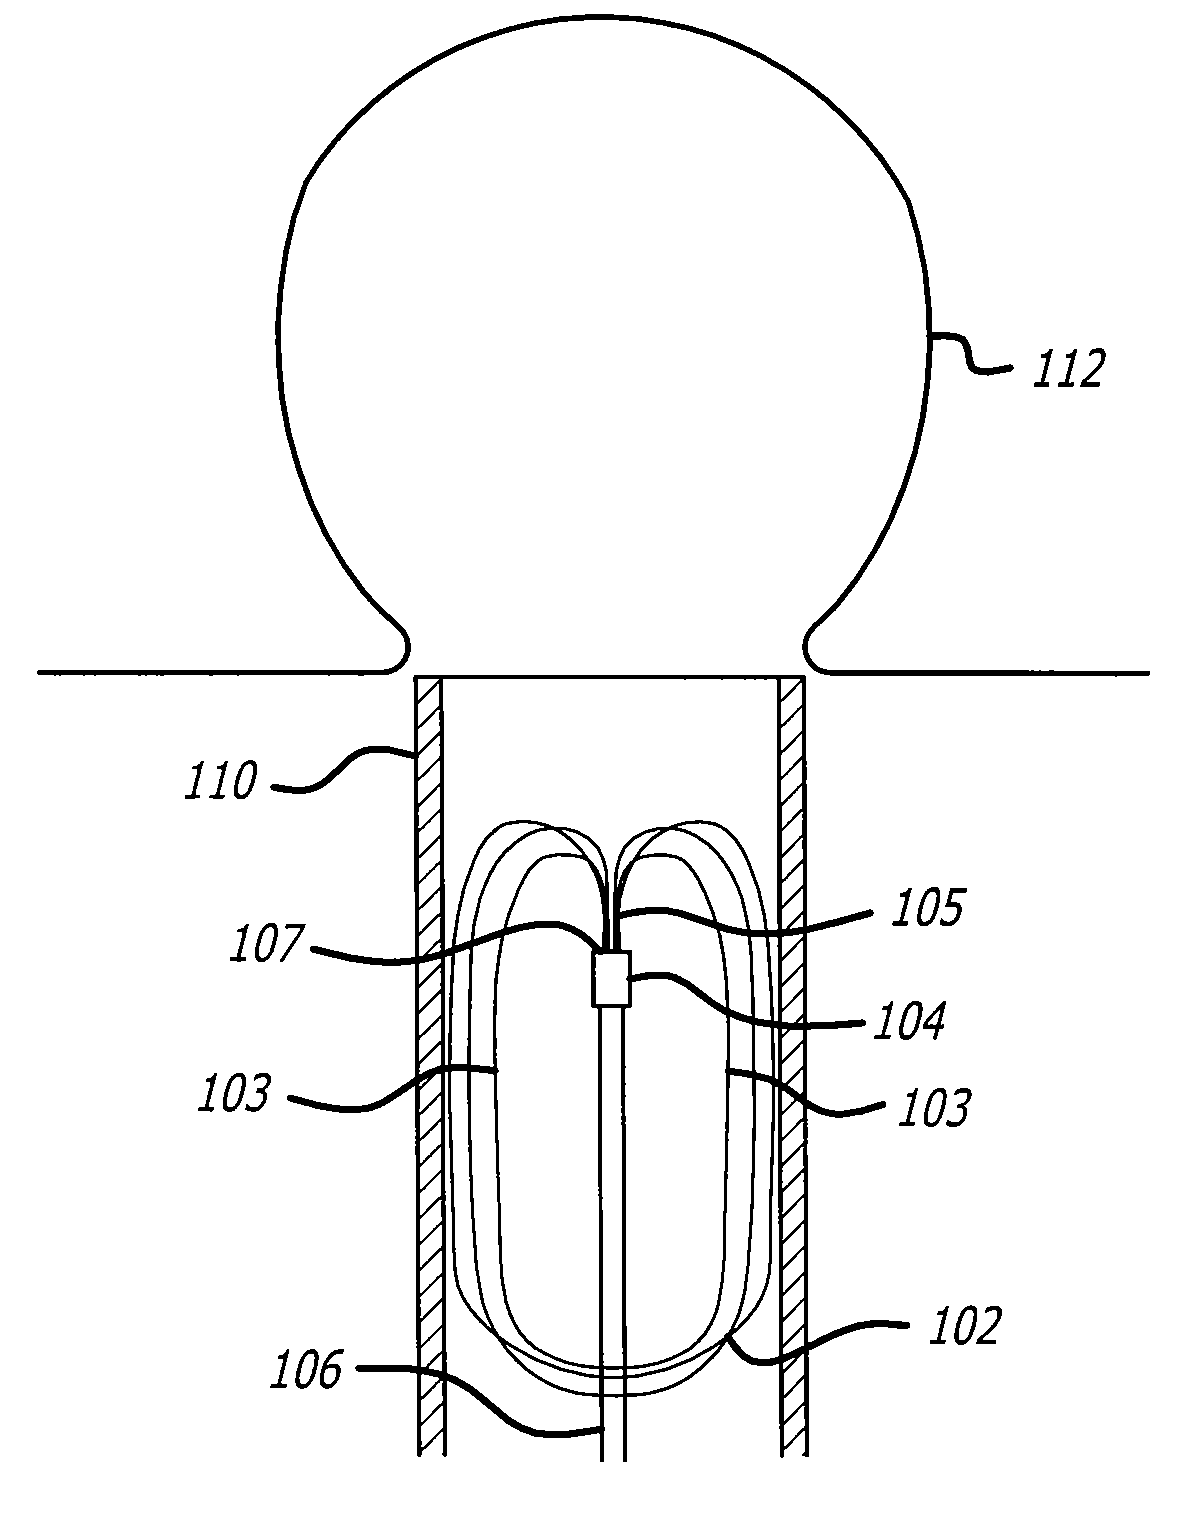 Self-expandable aneurysm filling device, system and method of placement